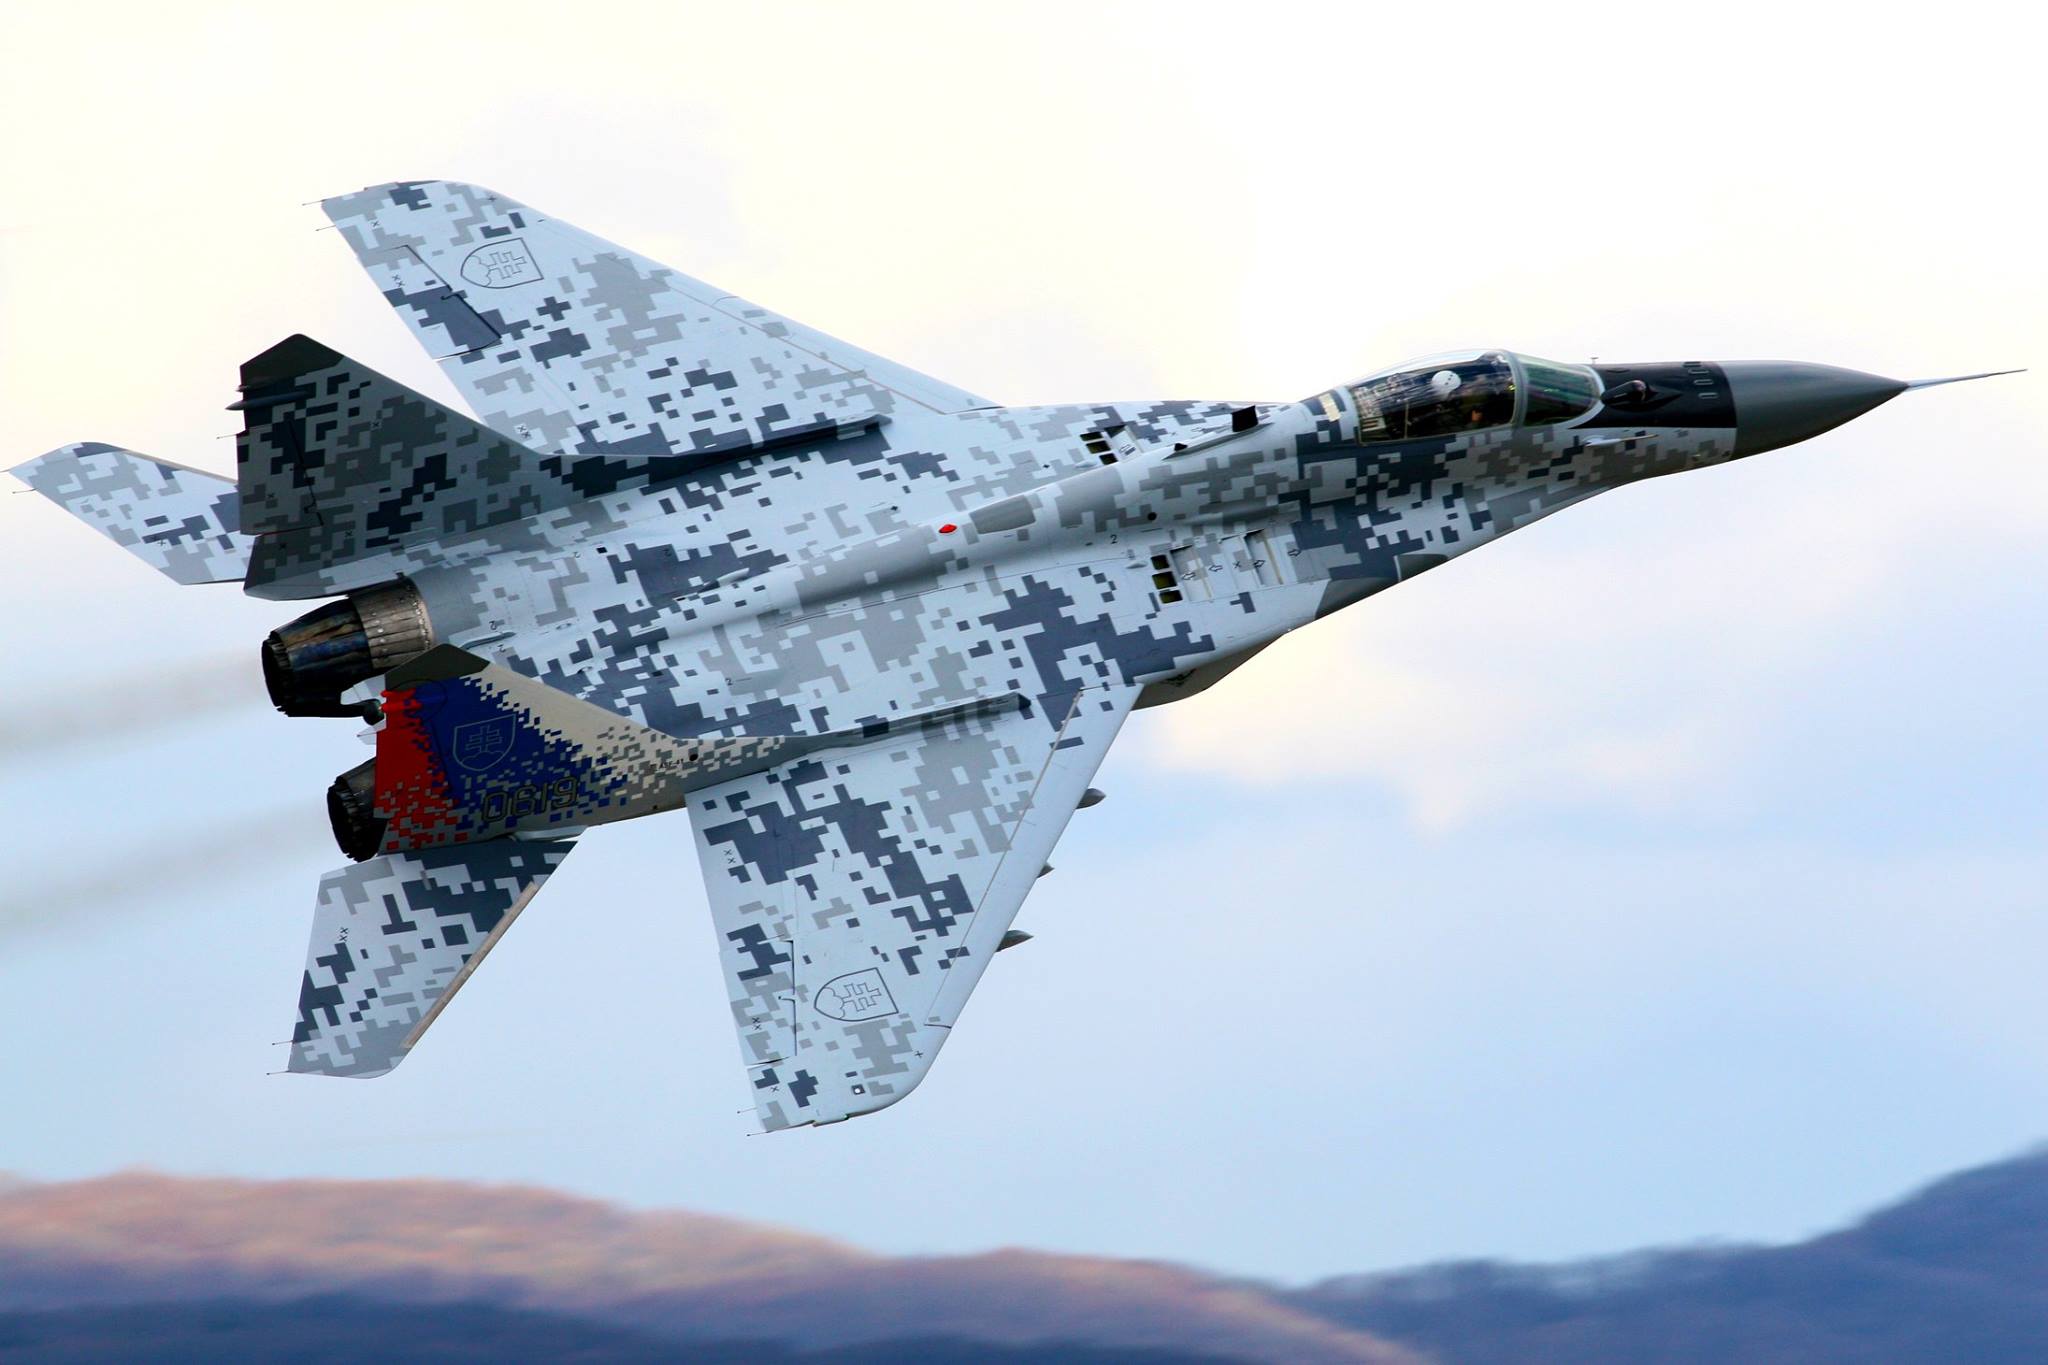 Allies Of Freedom: Slovakia Mulls Delivery Of MiG-29s To Ukraine - Oryx